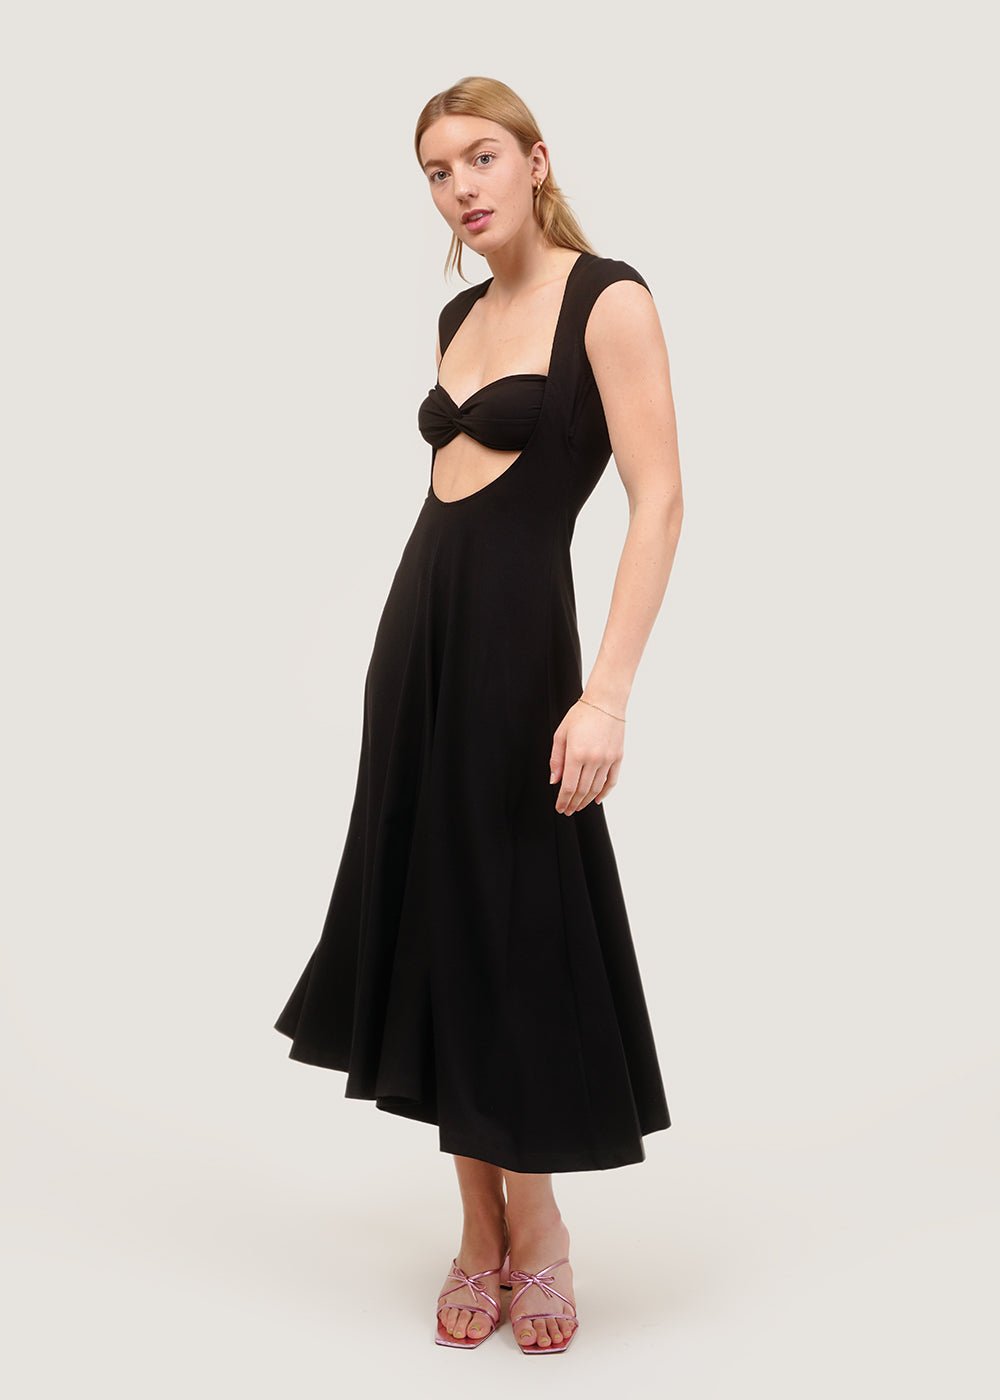 Beaufille Black Baes Dress - New Classics Studios Sustainable Ethical Fashion Canada